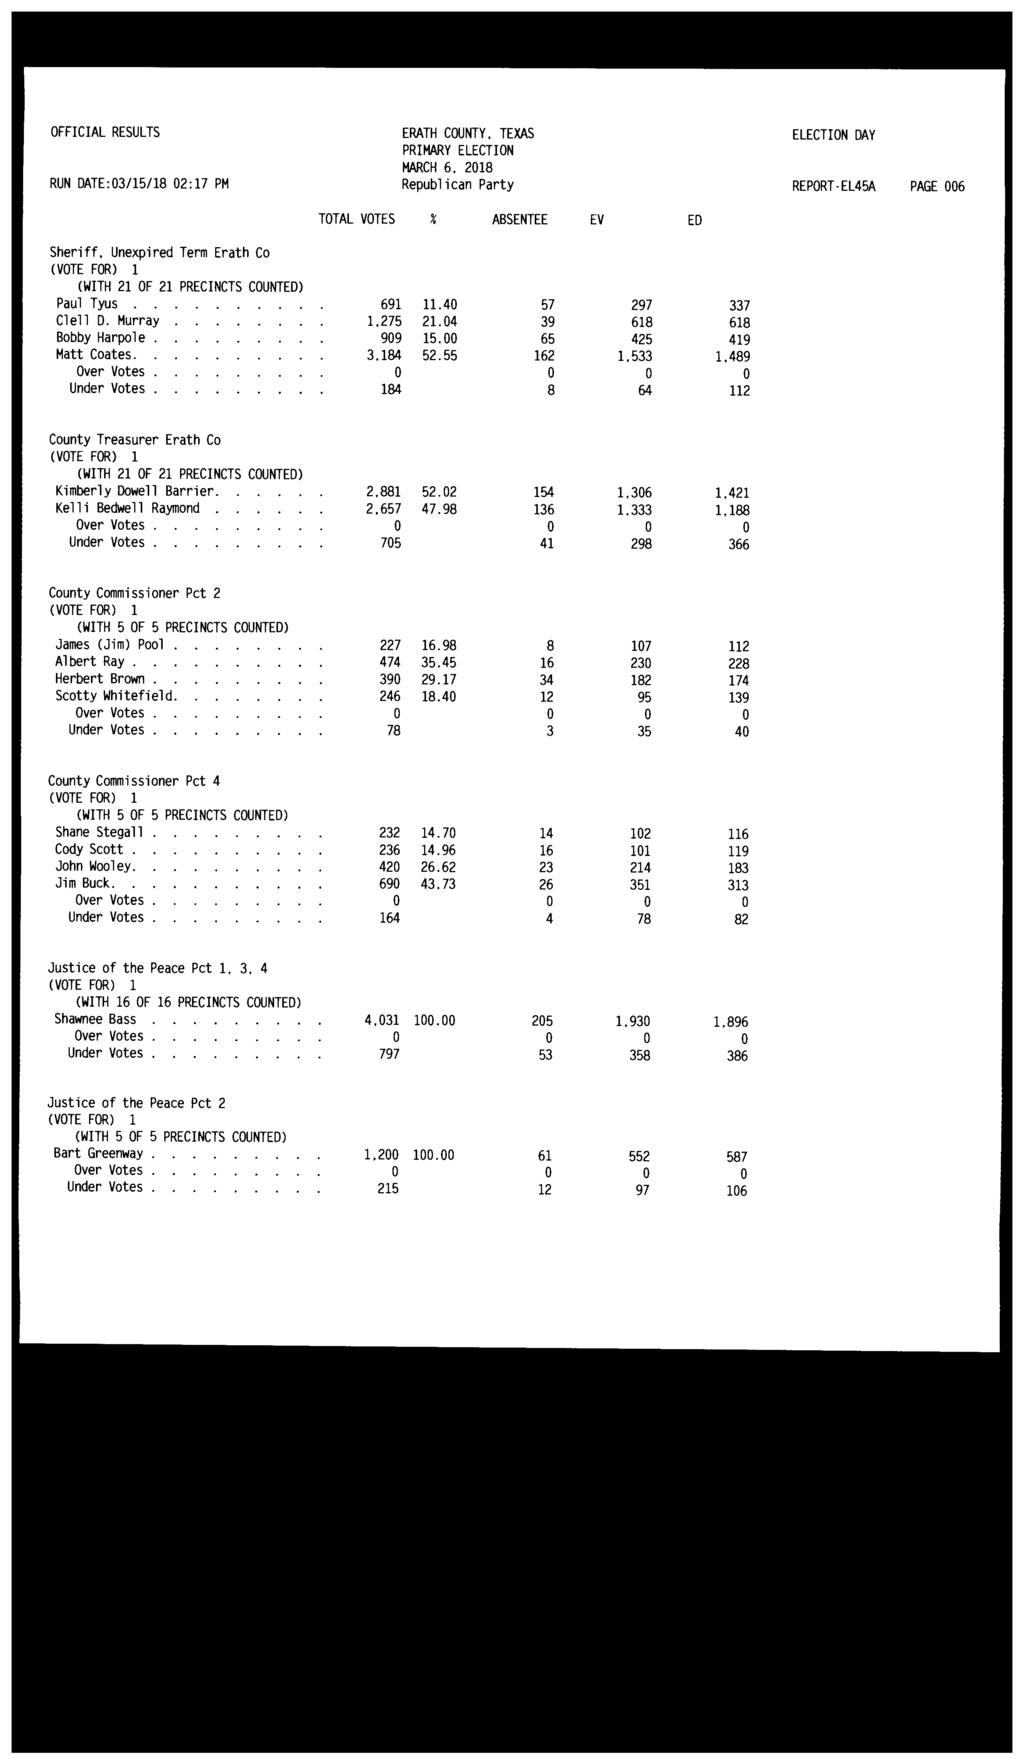 OFFICIAL RESULTS ERATH COUNTY. TEXAS RUN DATE:03/15/18 02:17 PM Republican Party REPORT-EL45A PAGE 006 Sheriff, Unexpired Term Erath Co Paul Tyus 691 11.40 57 297 337 Clell D. Murray 1.275 21.